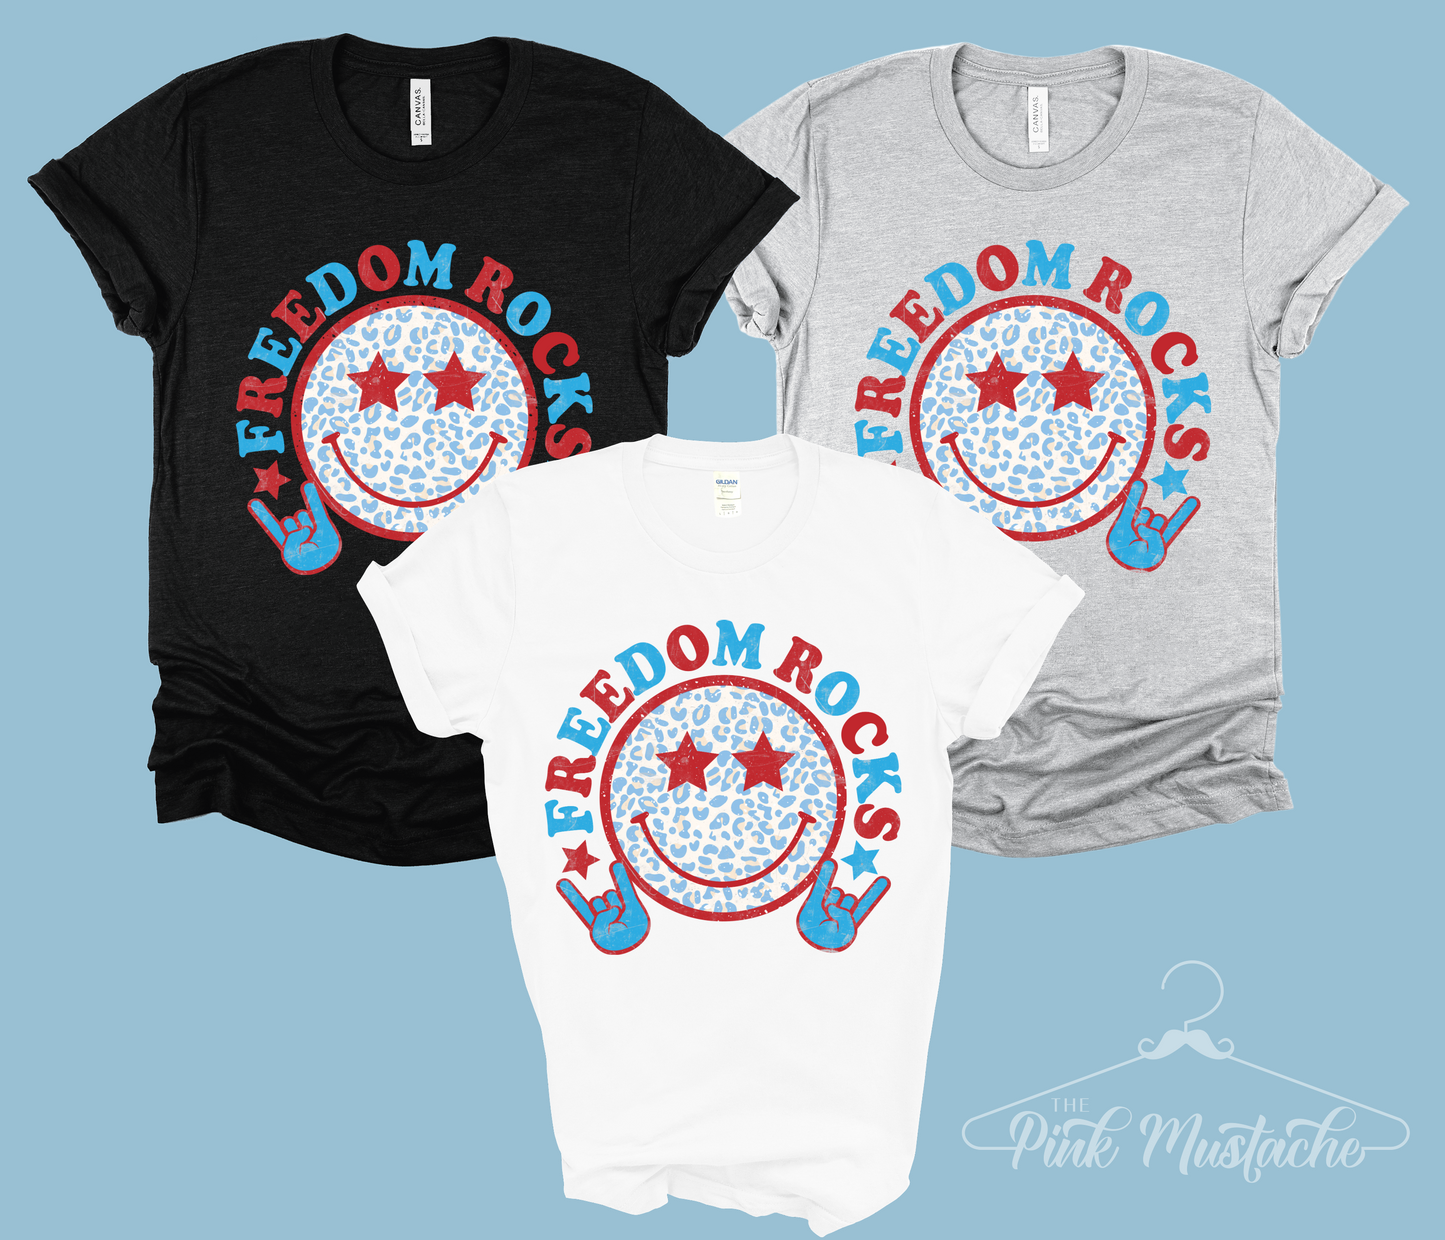 Freedom Rocks SoftStyle Tee/ July 4th Toddler, Youth, and Adult Shirt / Memorial Day July 4th Tee/ Retro Style Shirt